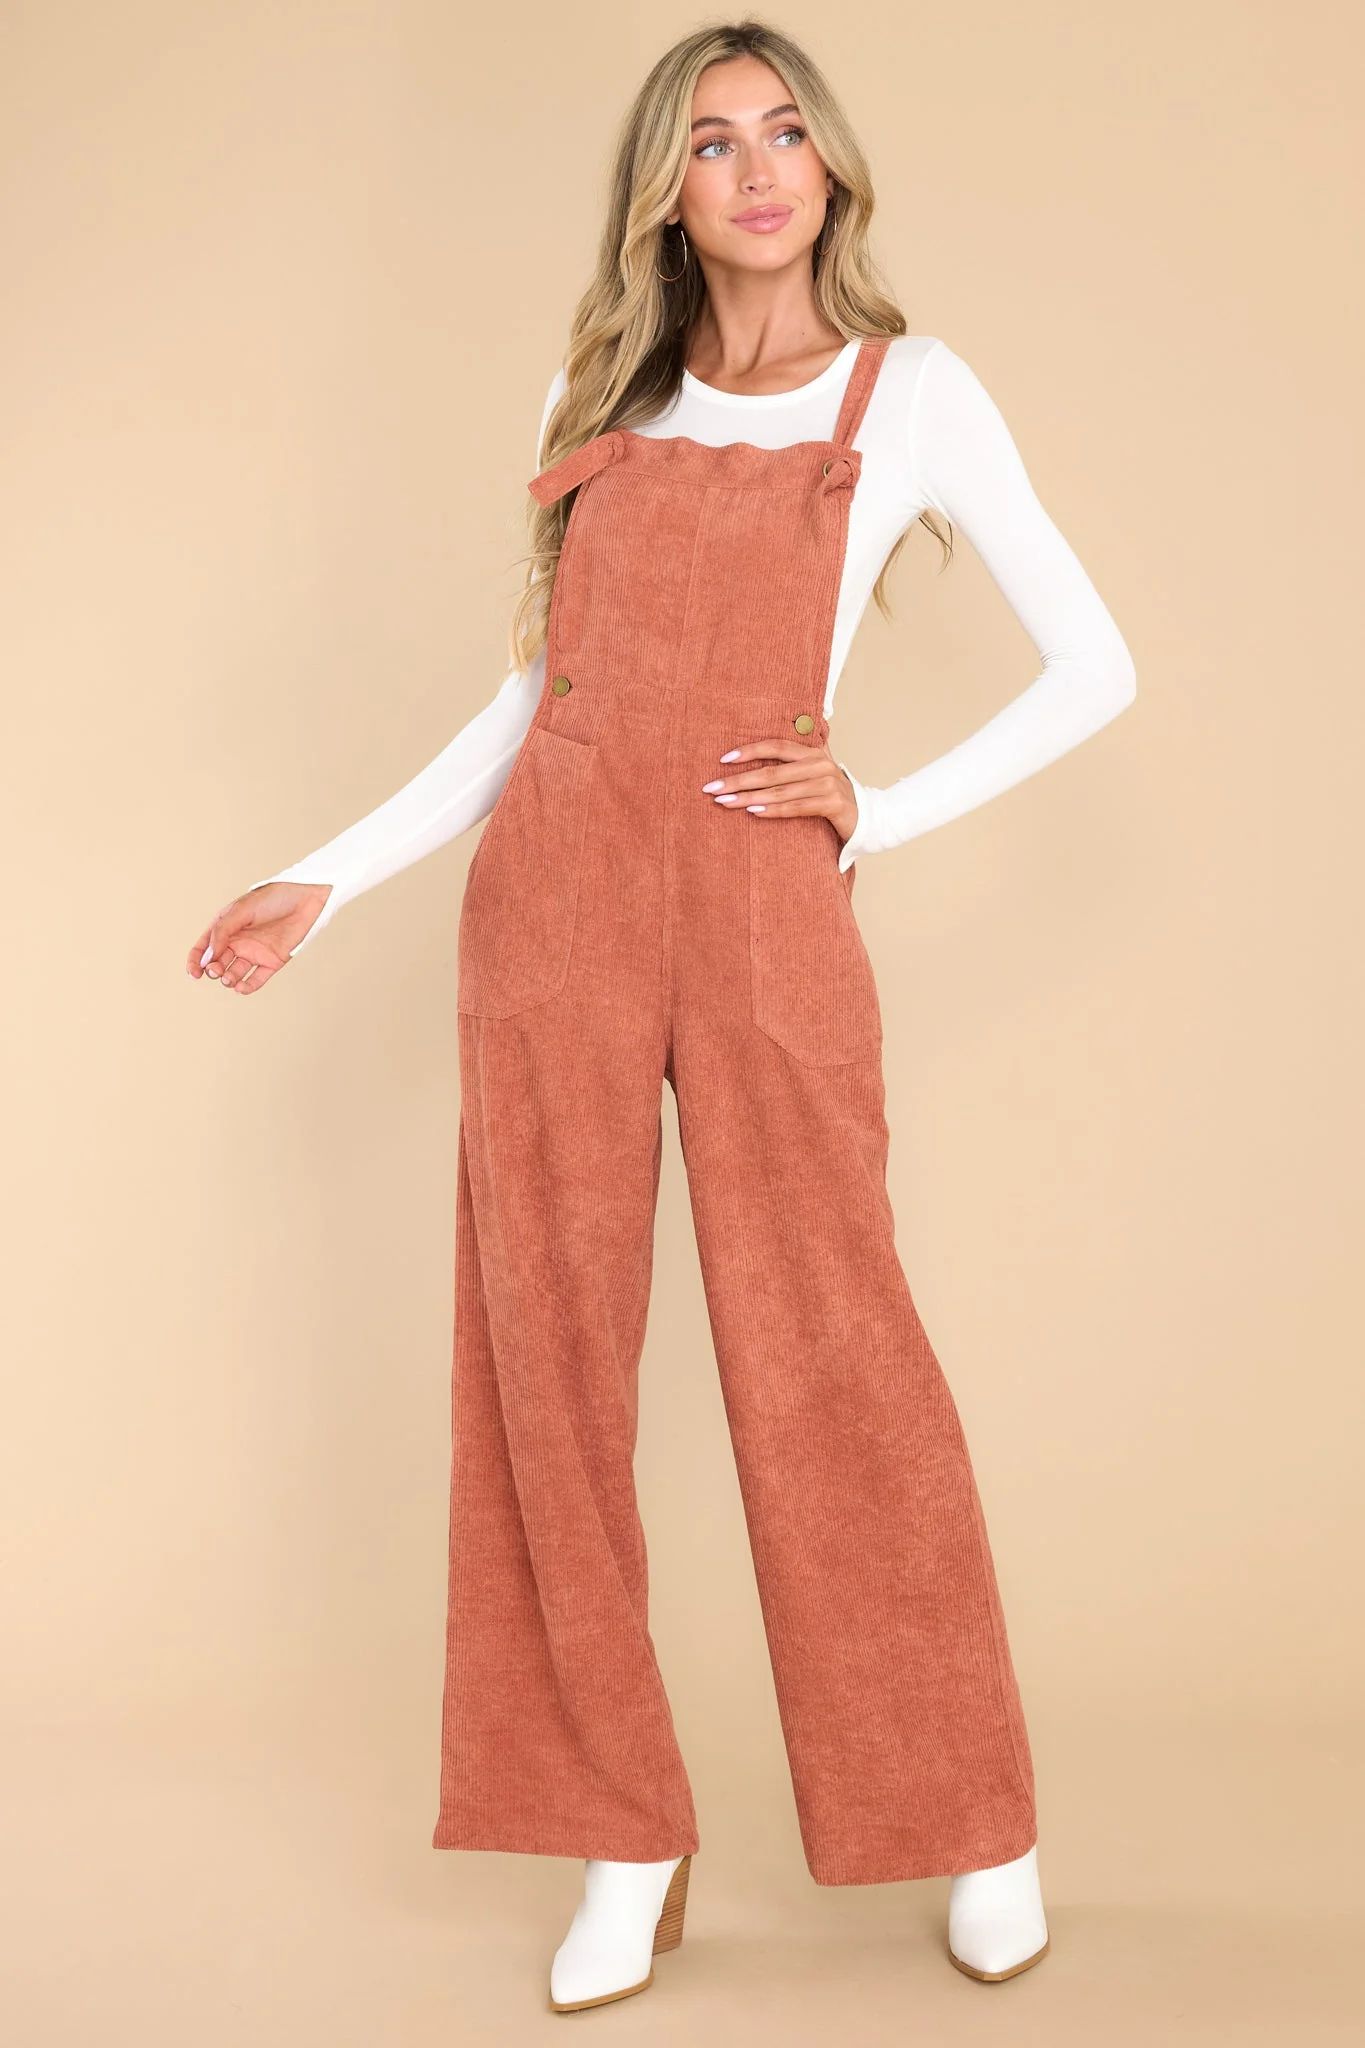 Stay Kind Terracotta Corduroy Overalls | Red Dress 